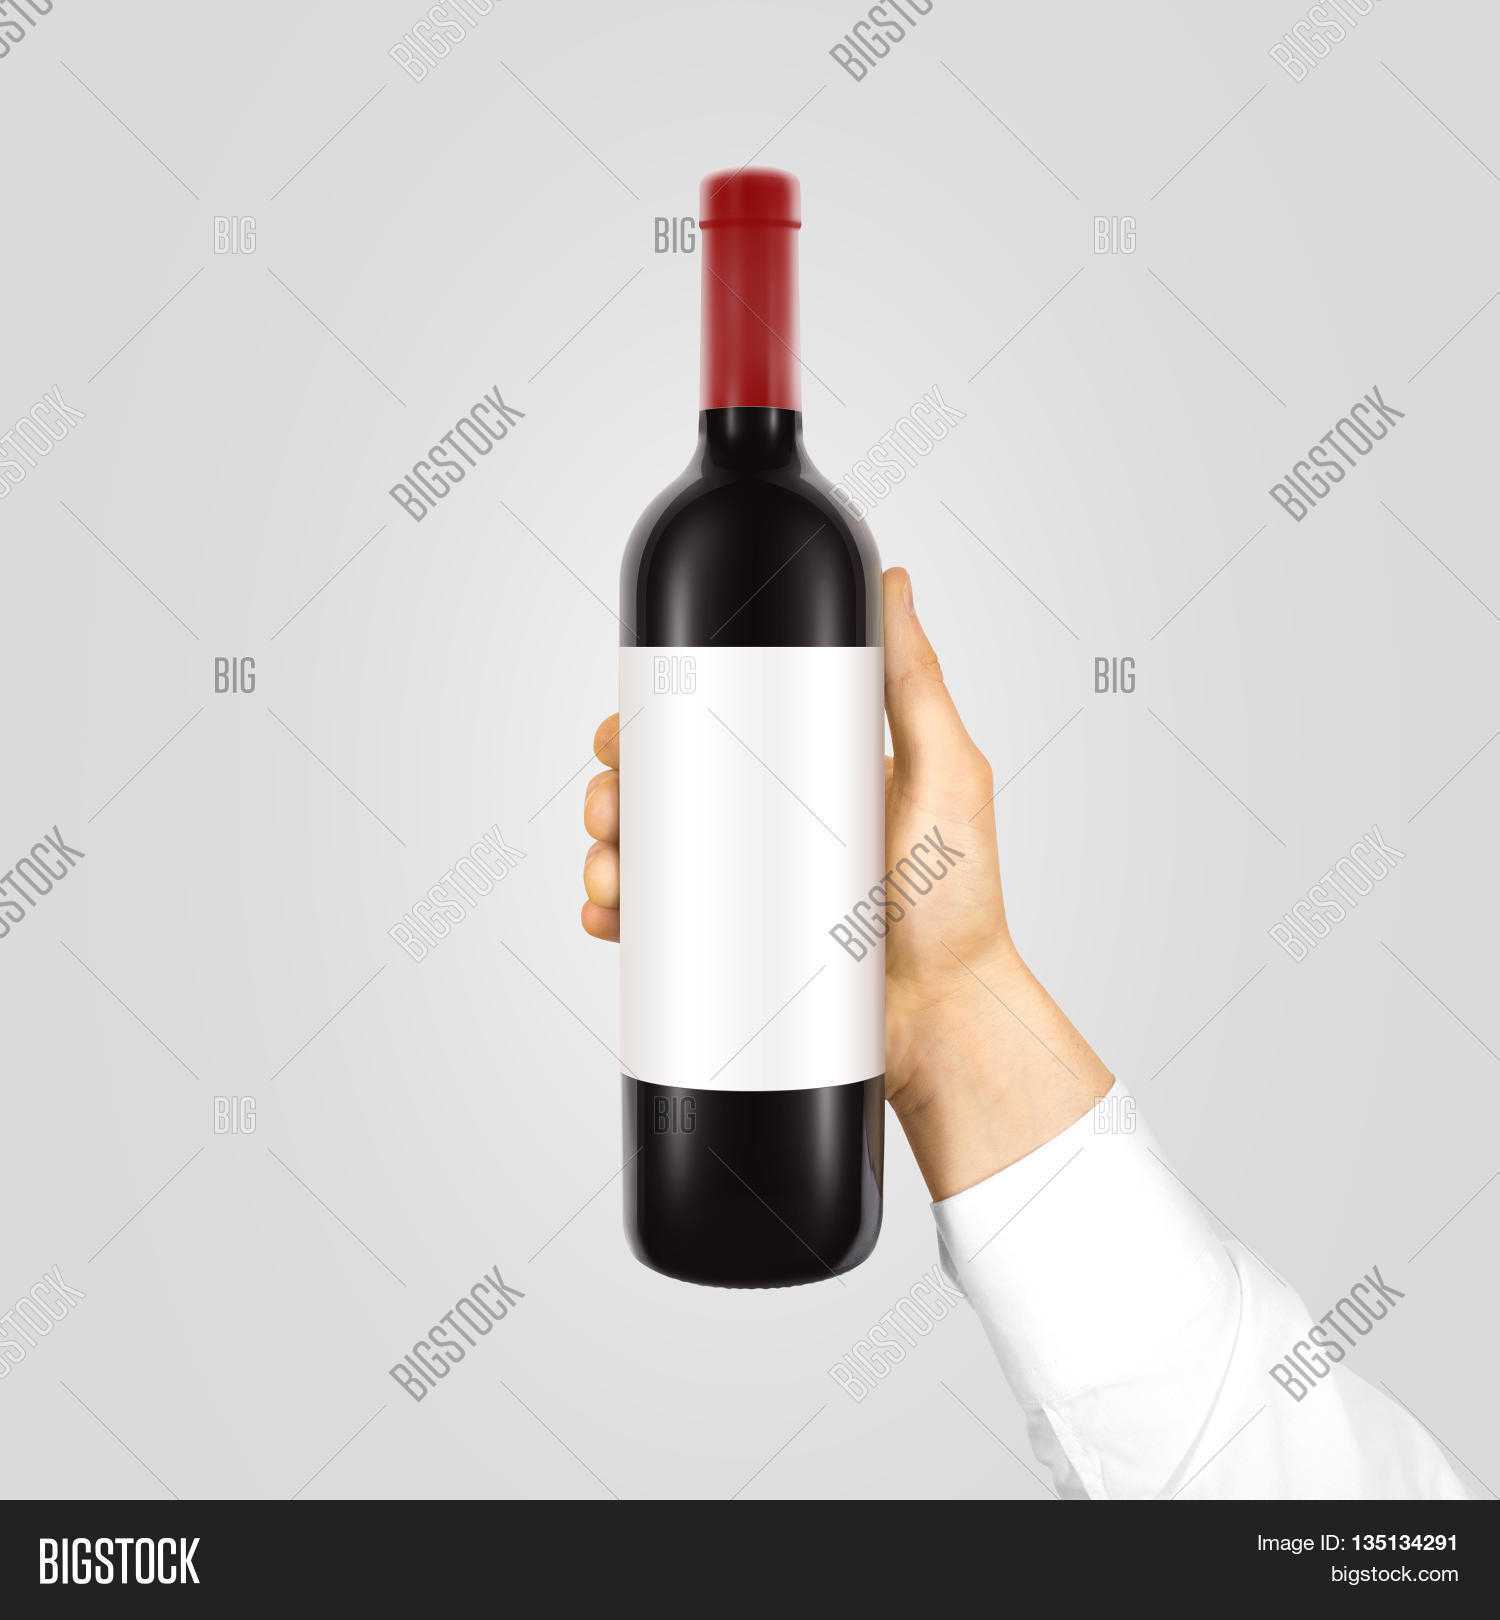 Blank White Label Image & Photo (Free Trial) | Bigstock Throughout Blank Wine Label Template